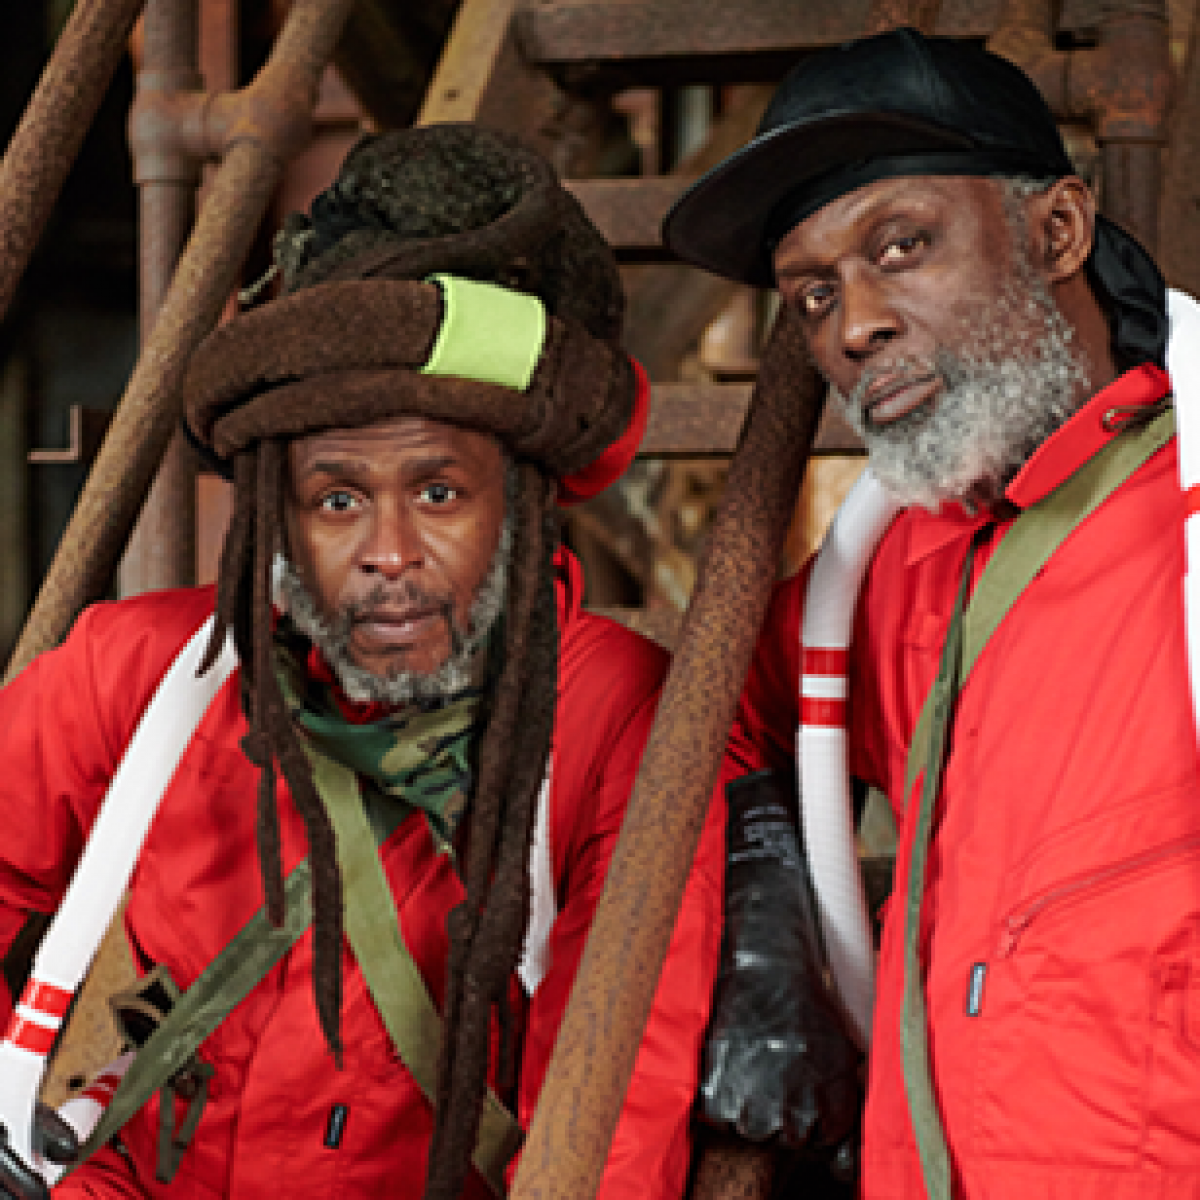 Steel Pulse Concert at Marin County Fair July 2019 Marin Convention